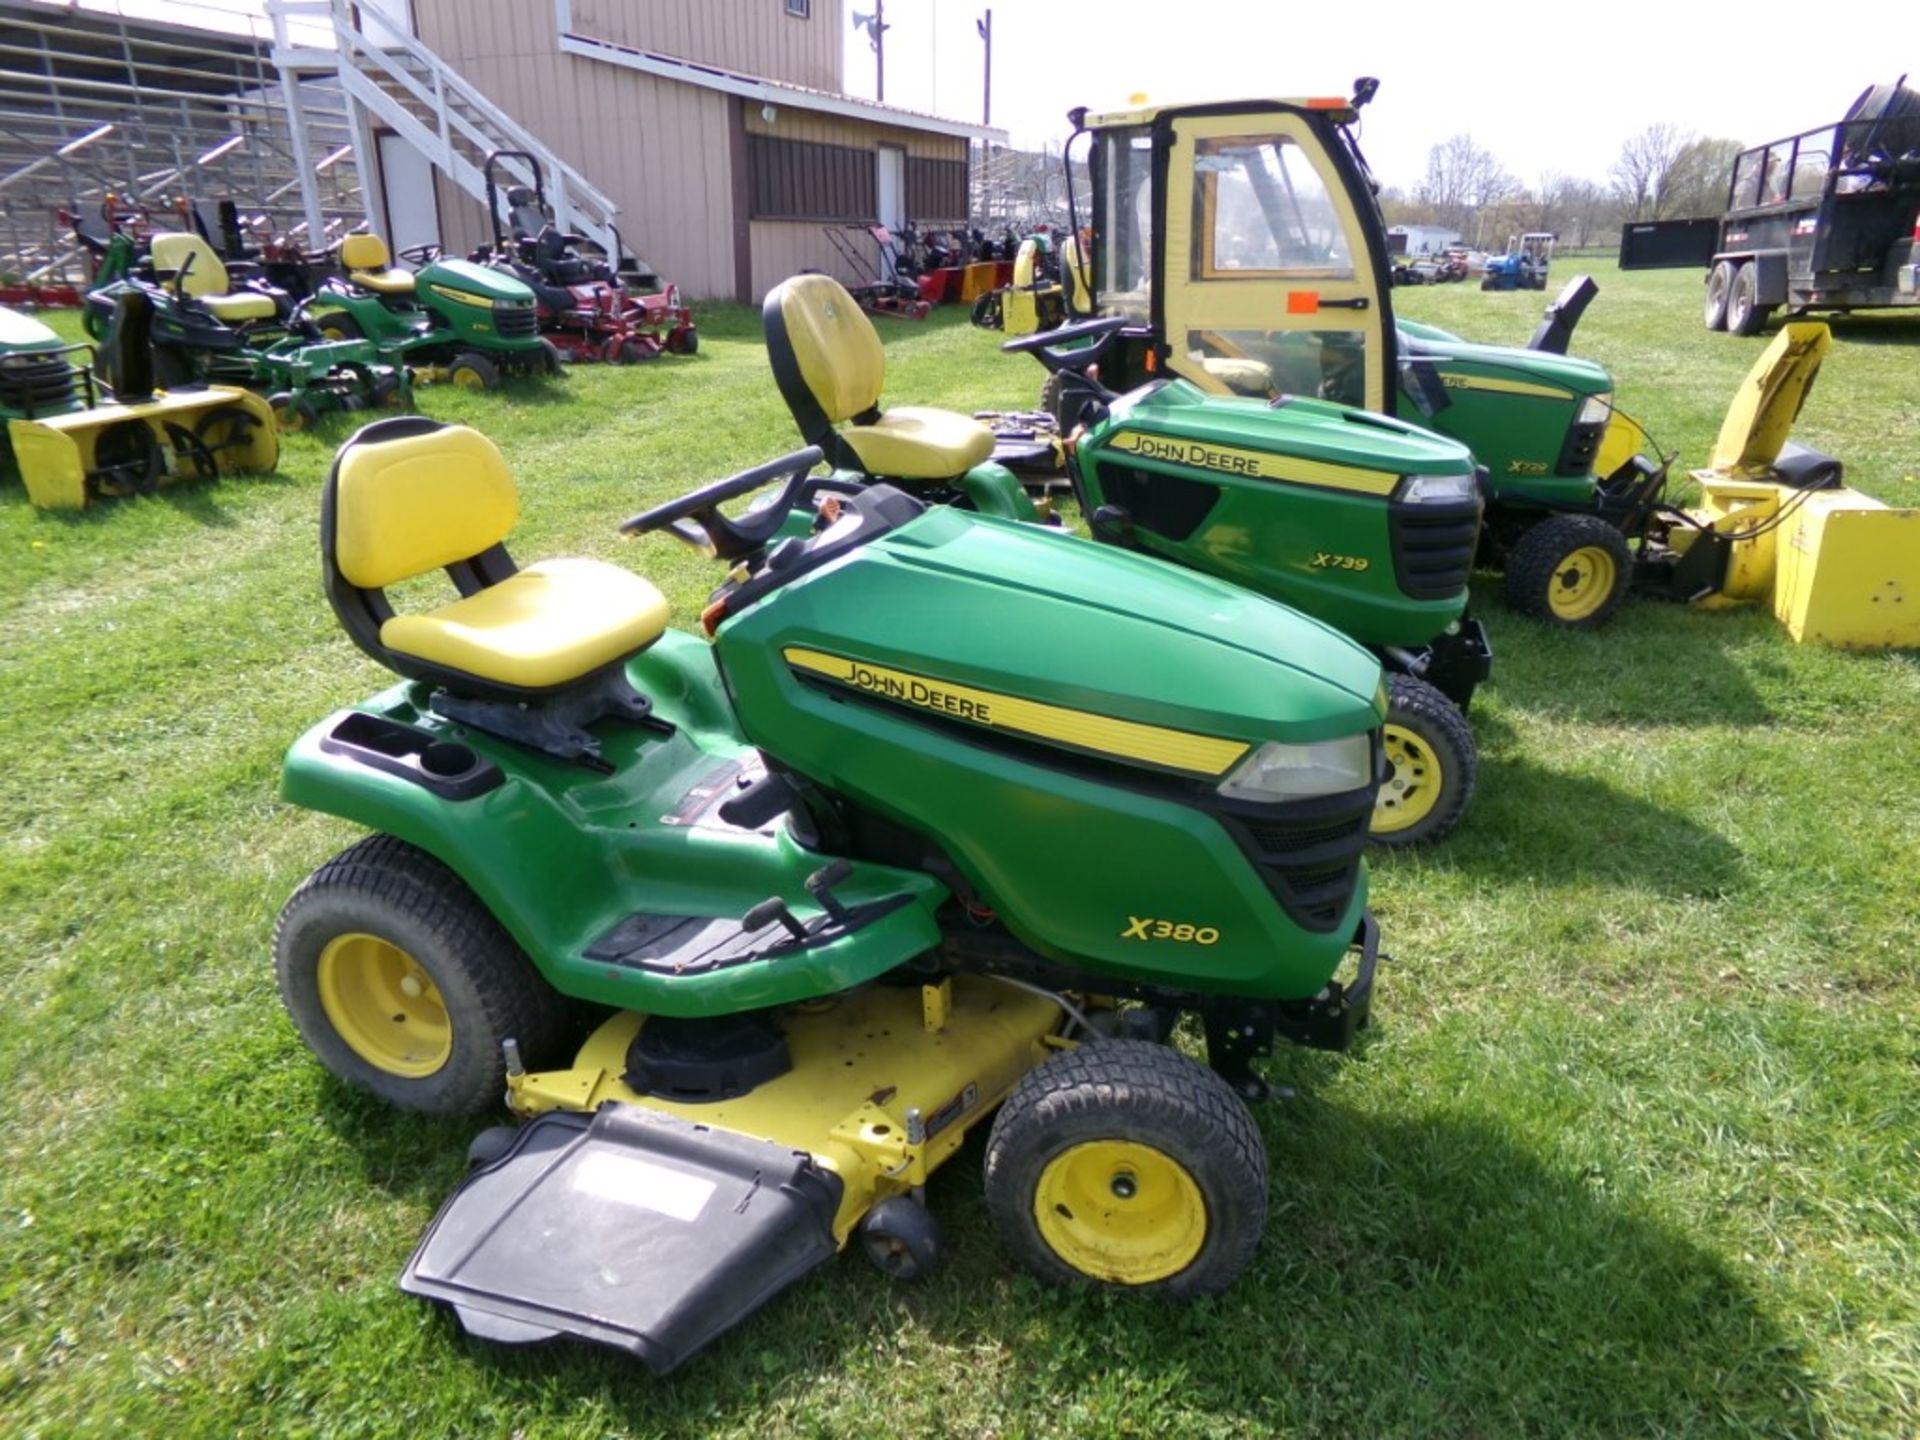 John Deere X380 Riding Mower with 48'' deck, 22 HP, Hydro, 344 Hrs., Ser. # 053754 (5053) - Image 2 of 2